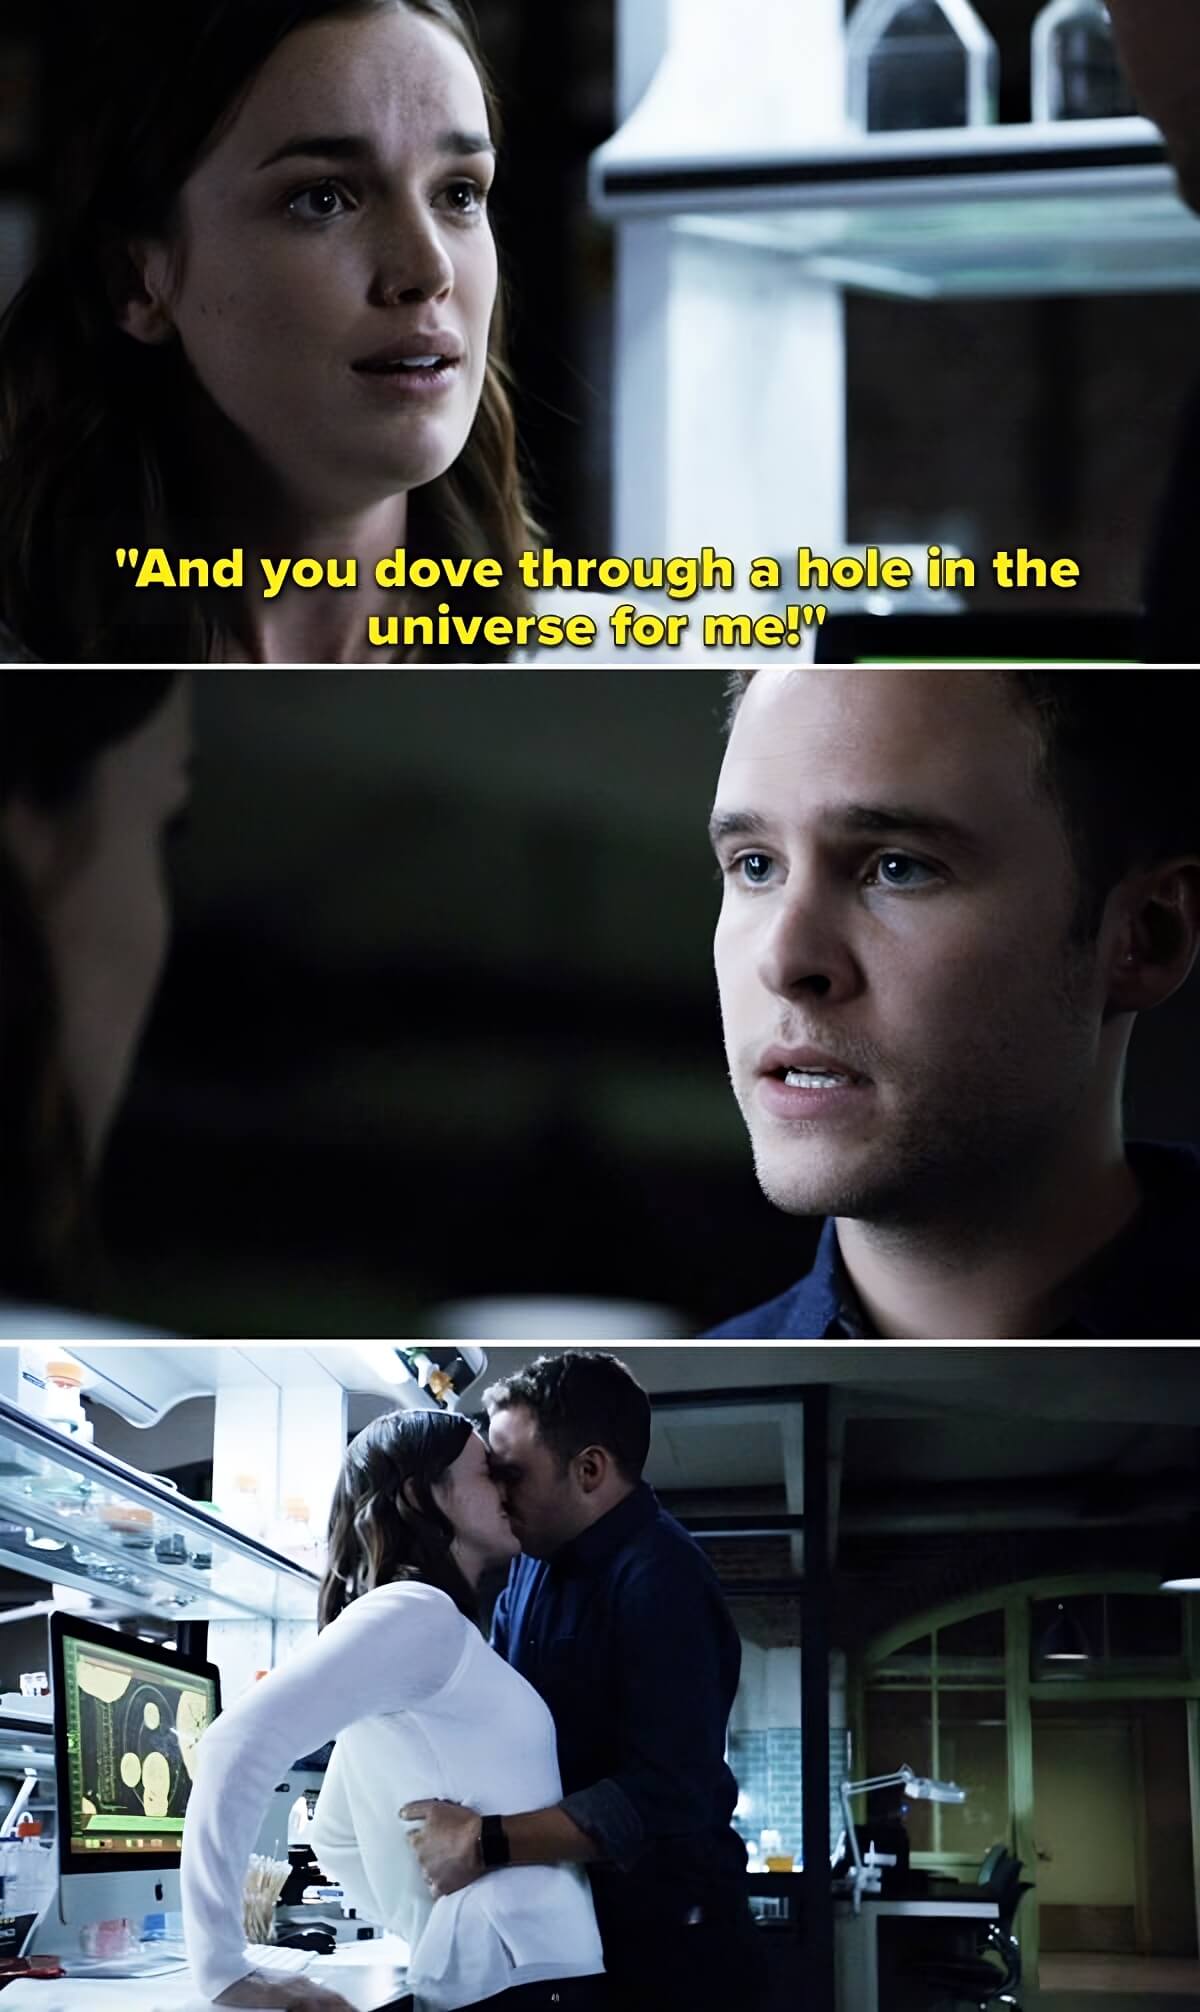 Leo Fitz and Jemma Simmons from Agents of S.H.I.E.L.D.